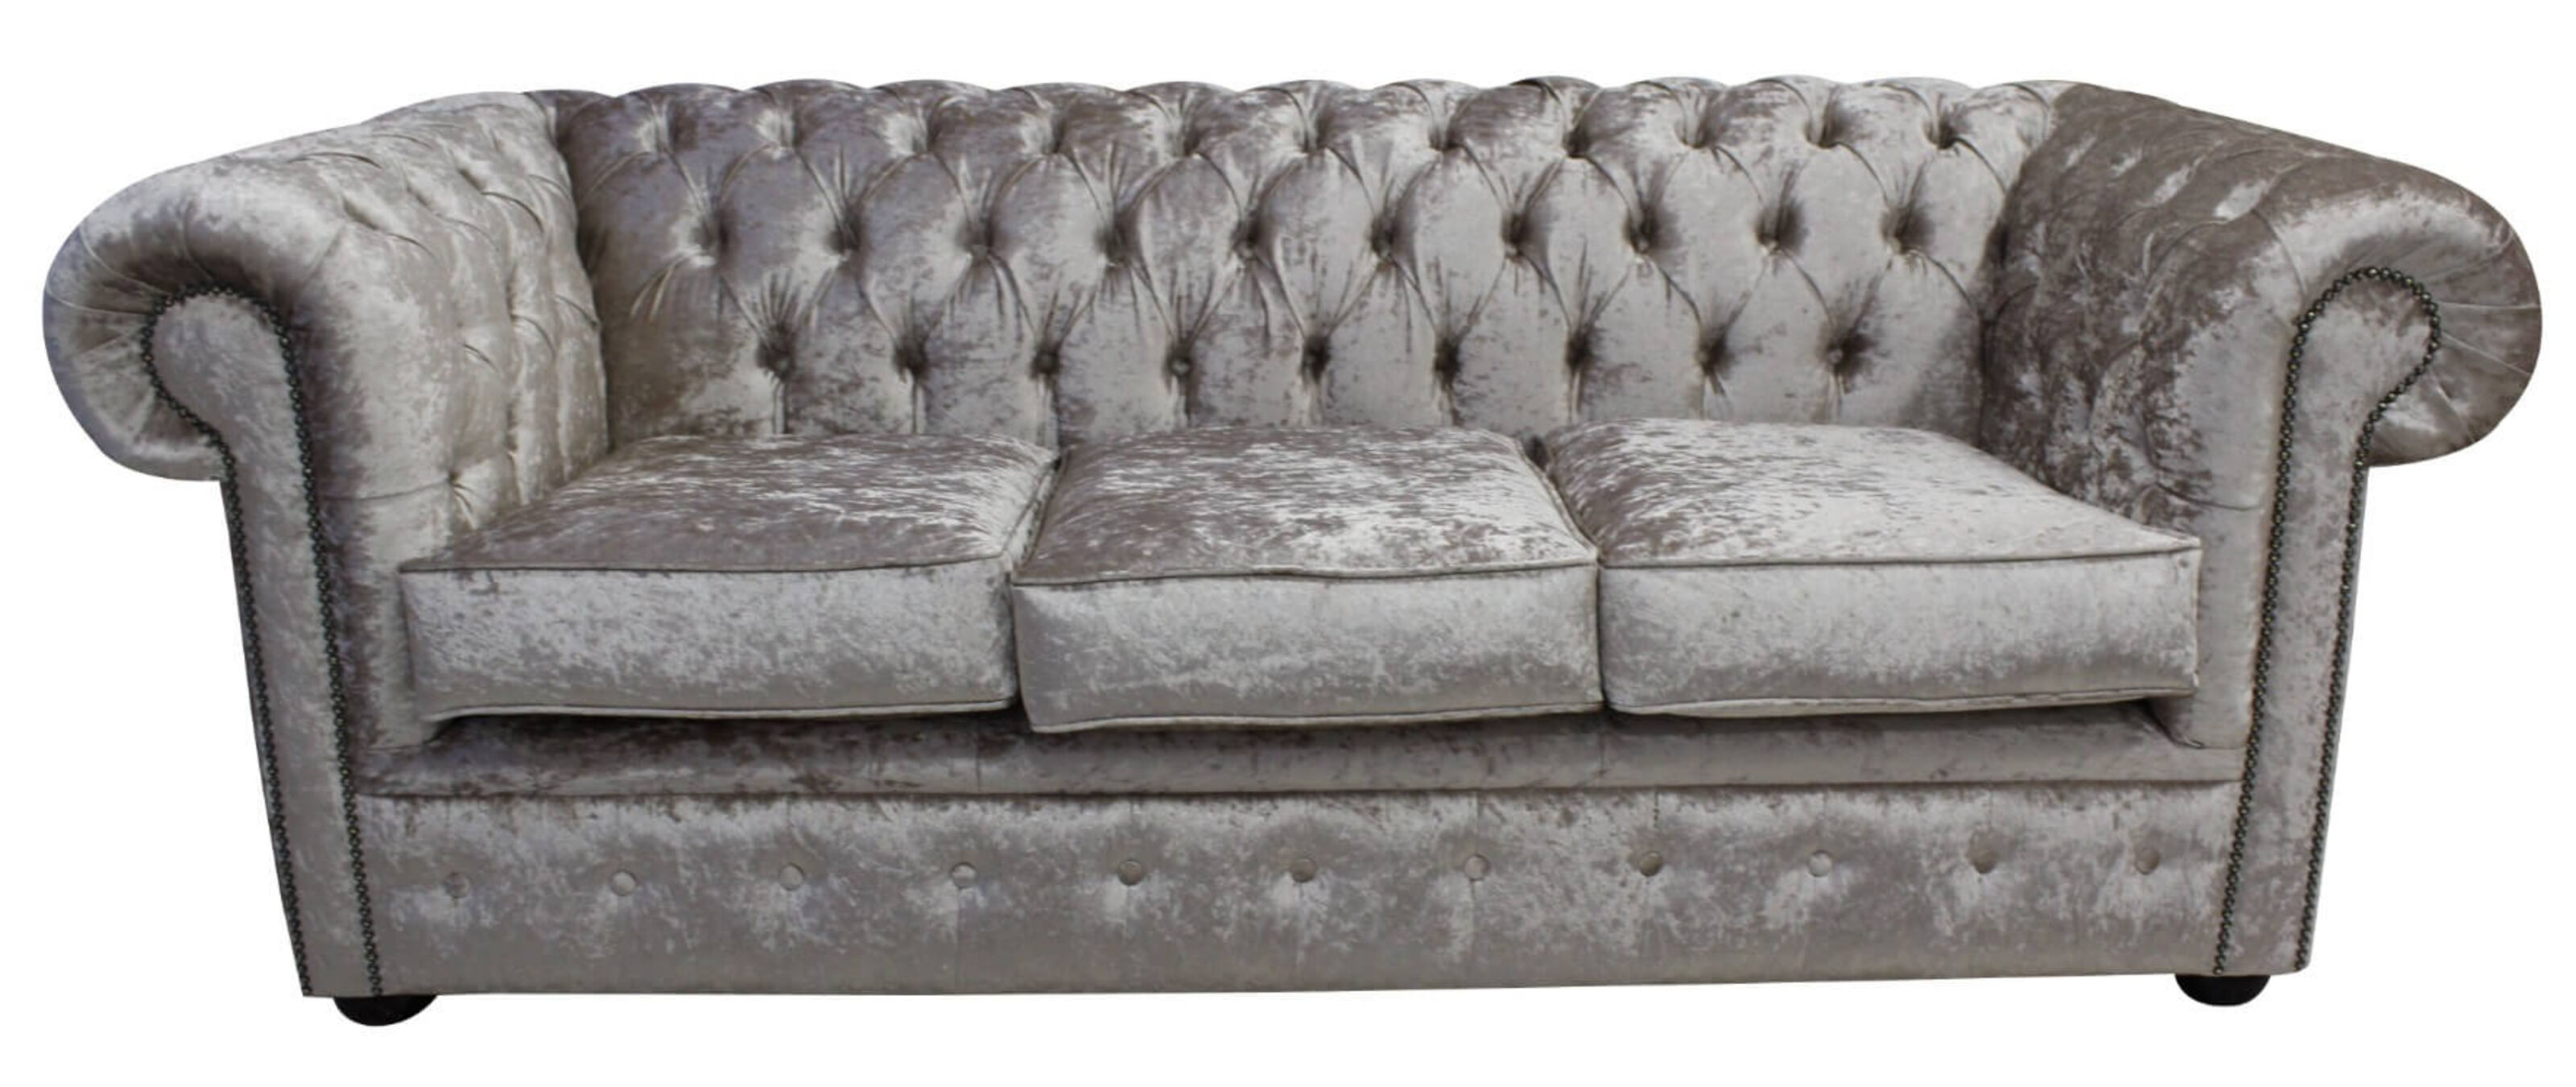 Artisanal Charm Unique Chesterfield Sofas Available on Etsy  %Post Title